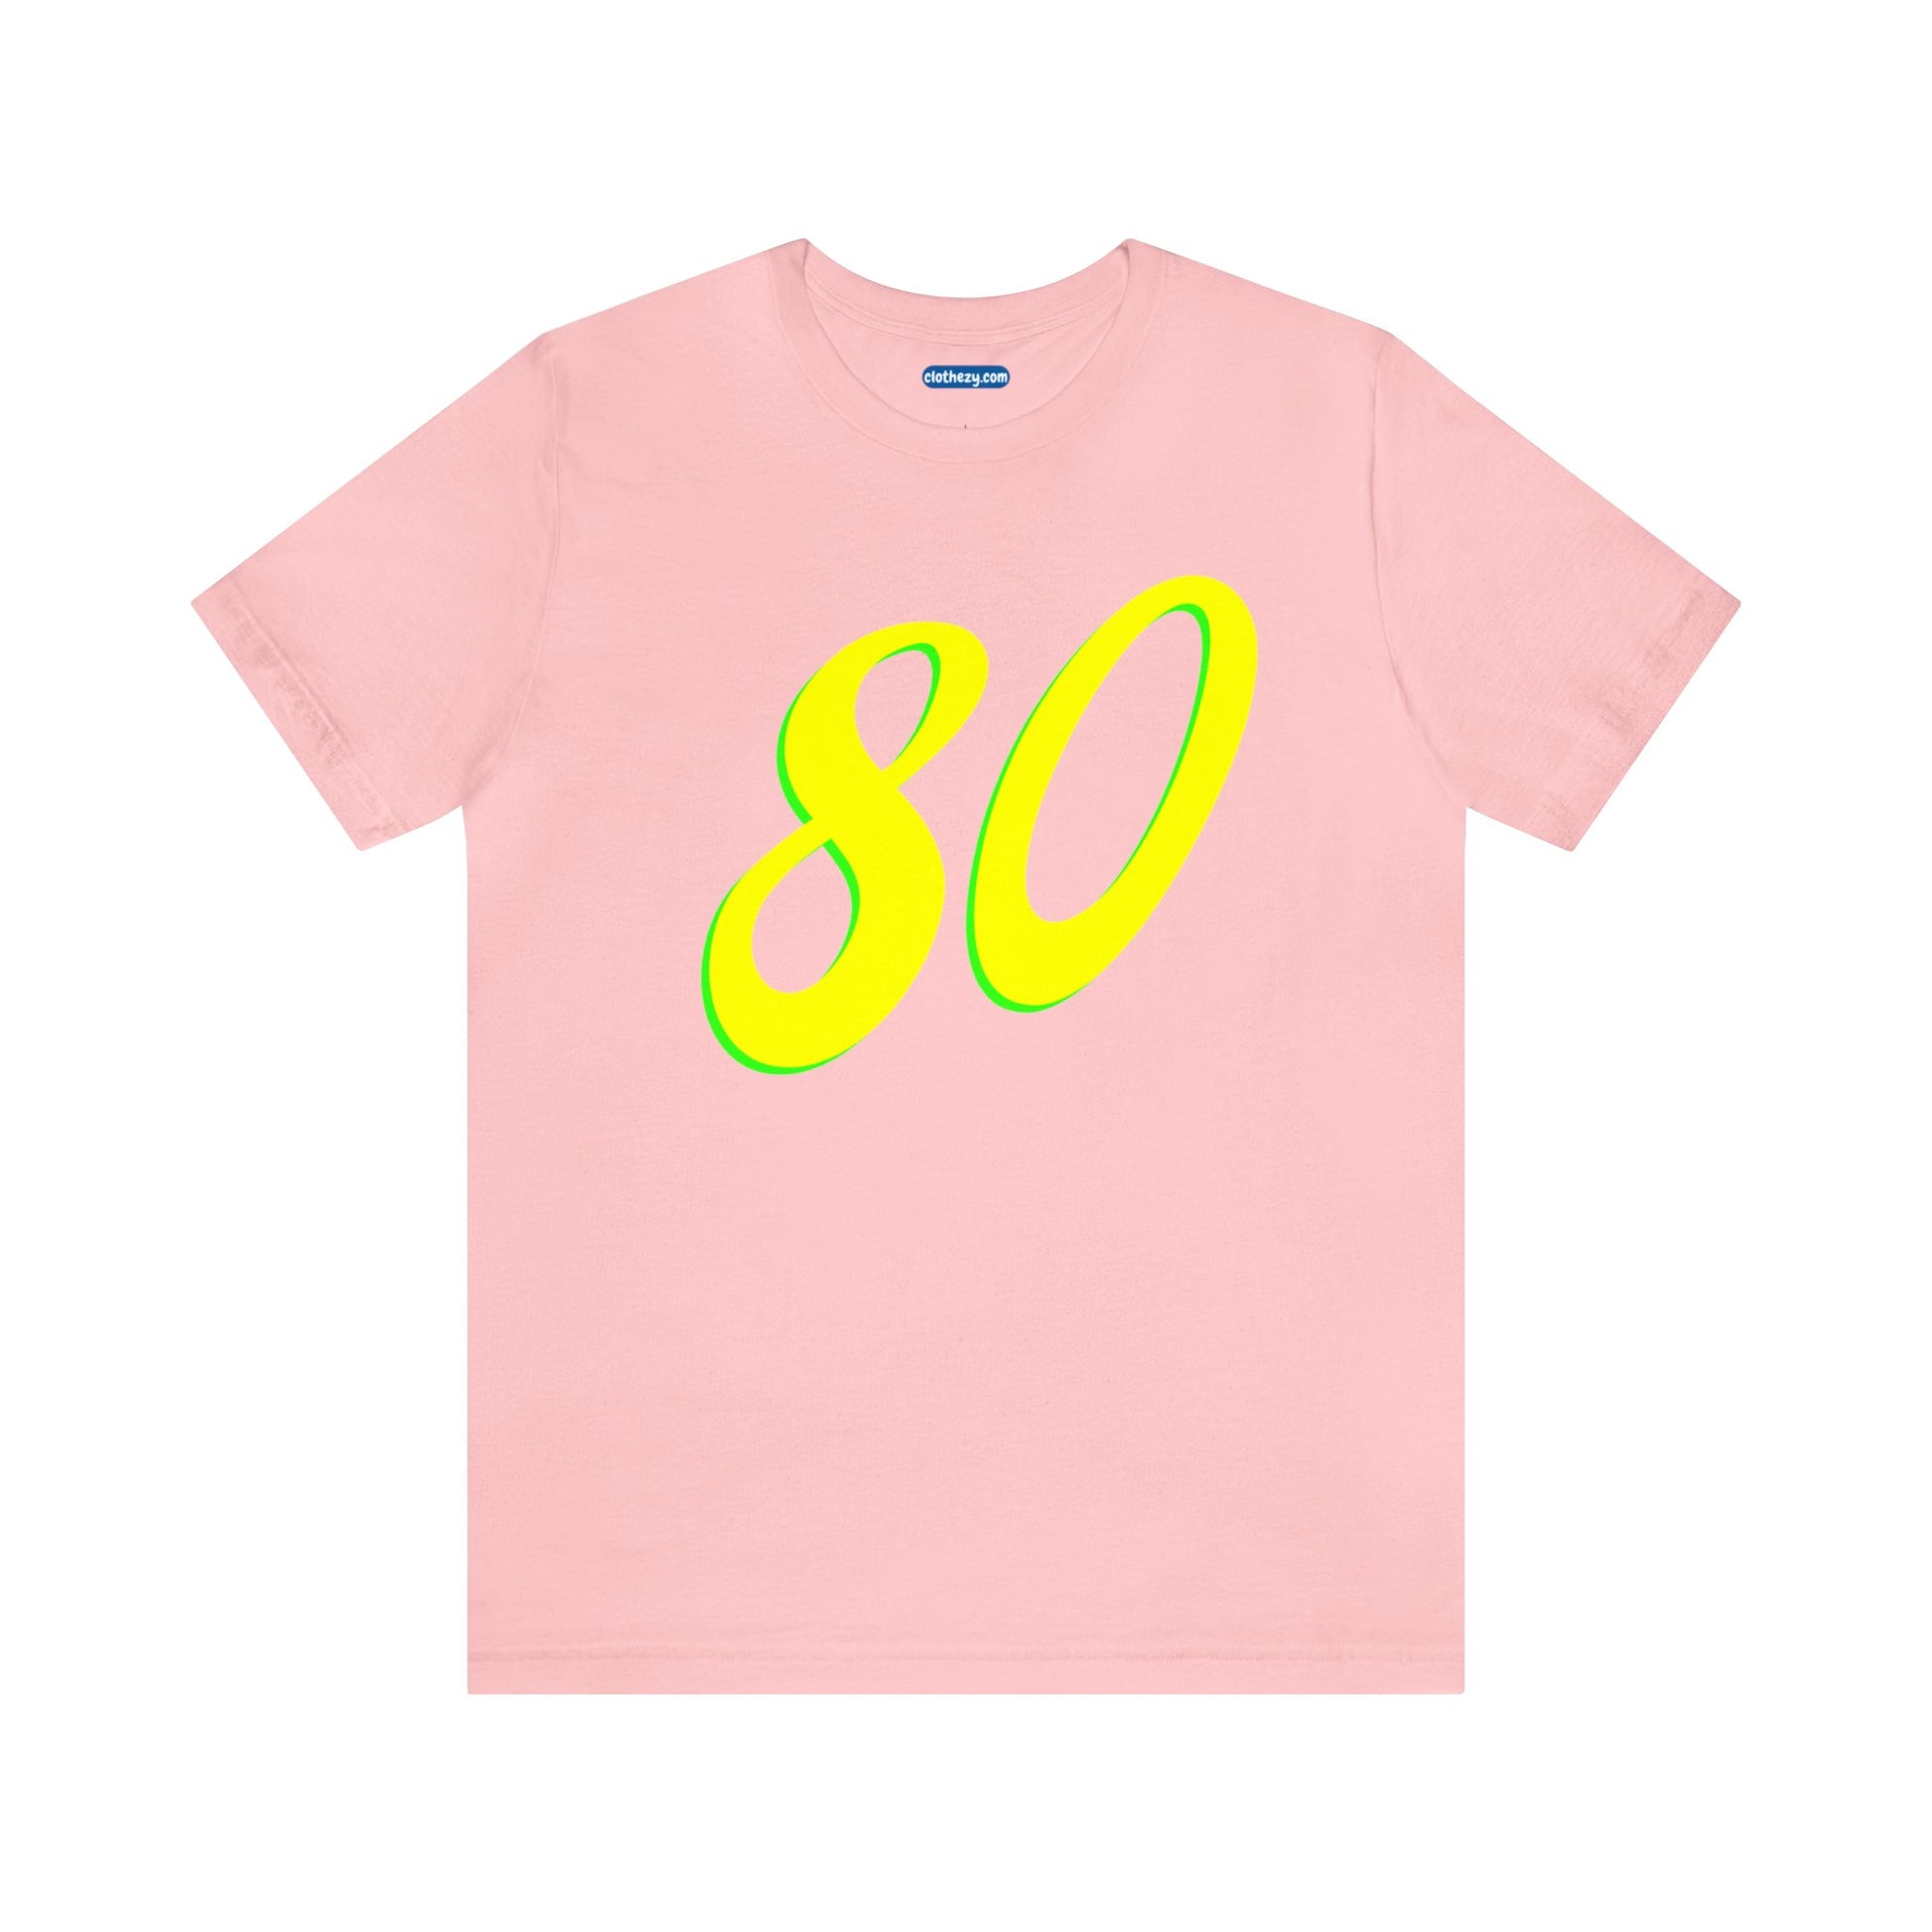 Number 80 Design - Soft Cotton Tee for birthdays and celebrations, Gift for friends and family, Multiple Options by clothezy.com in Red Size Small - Buy Now